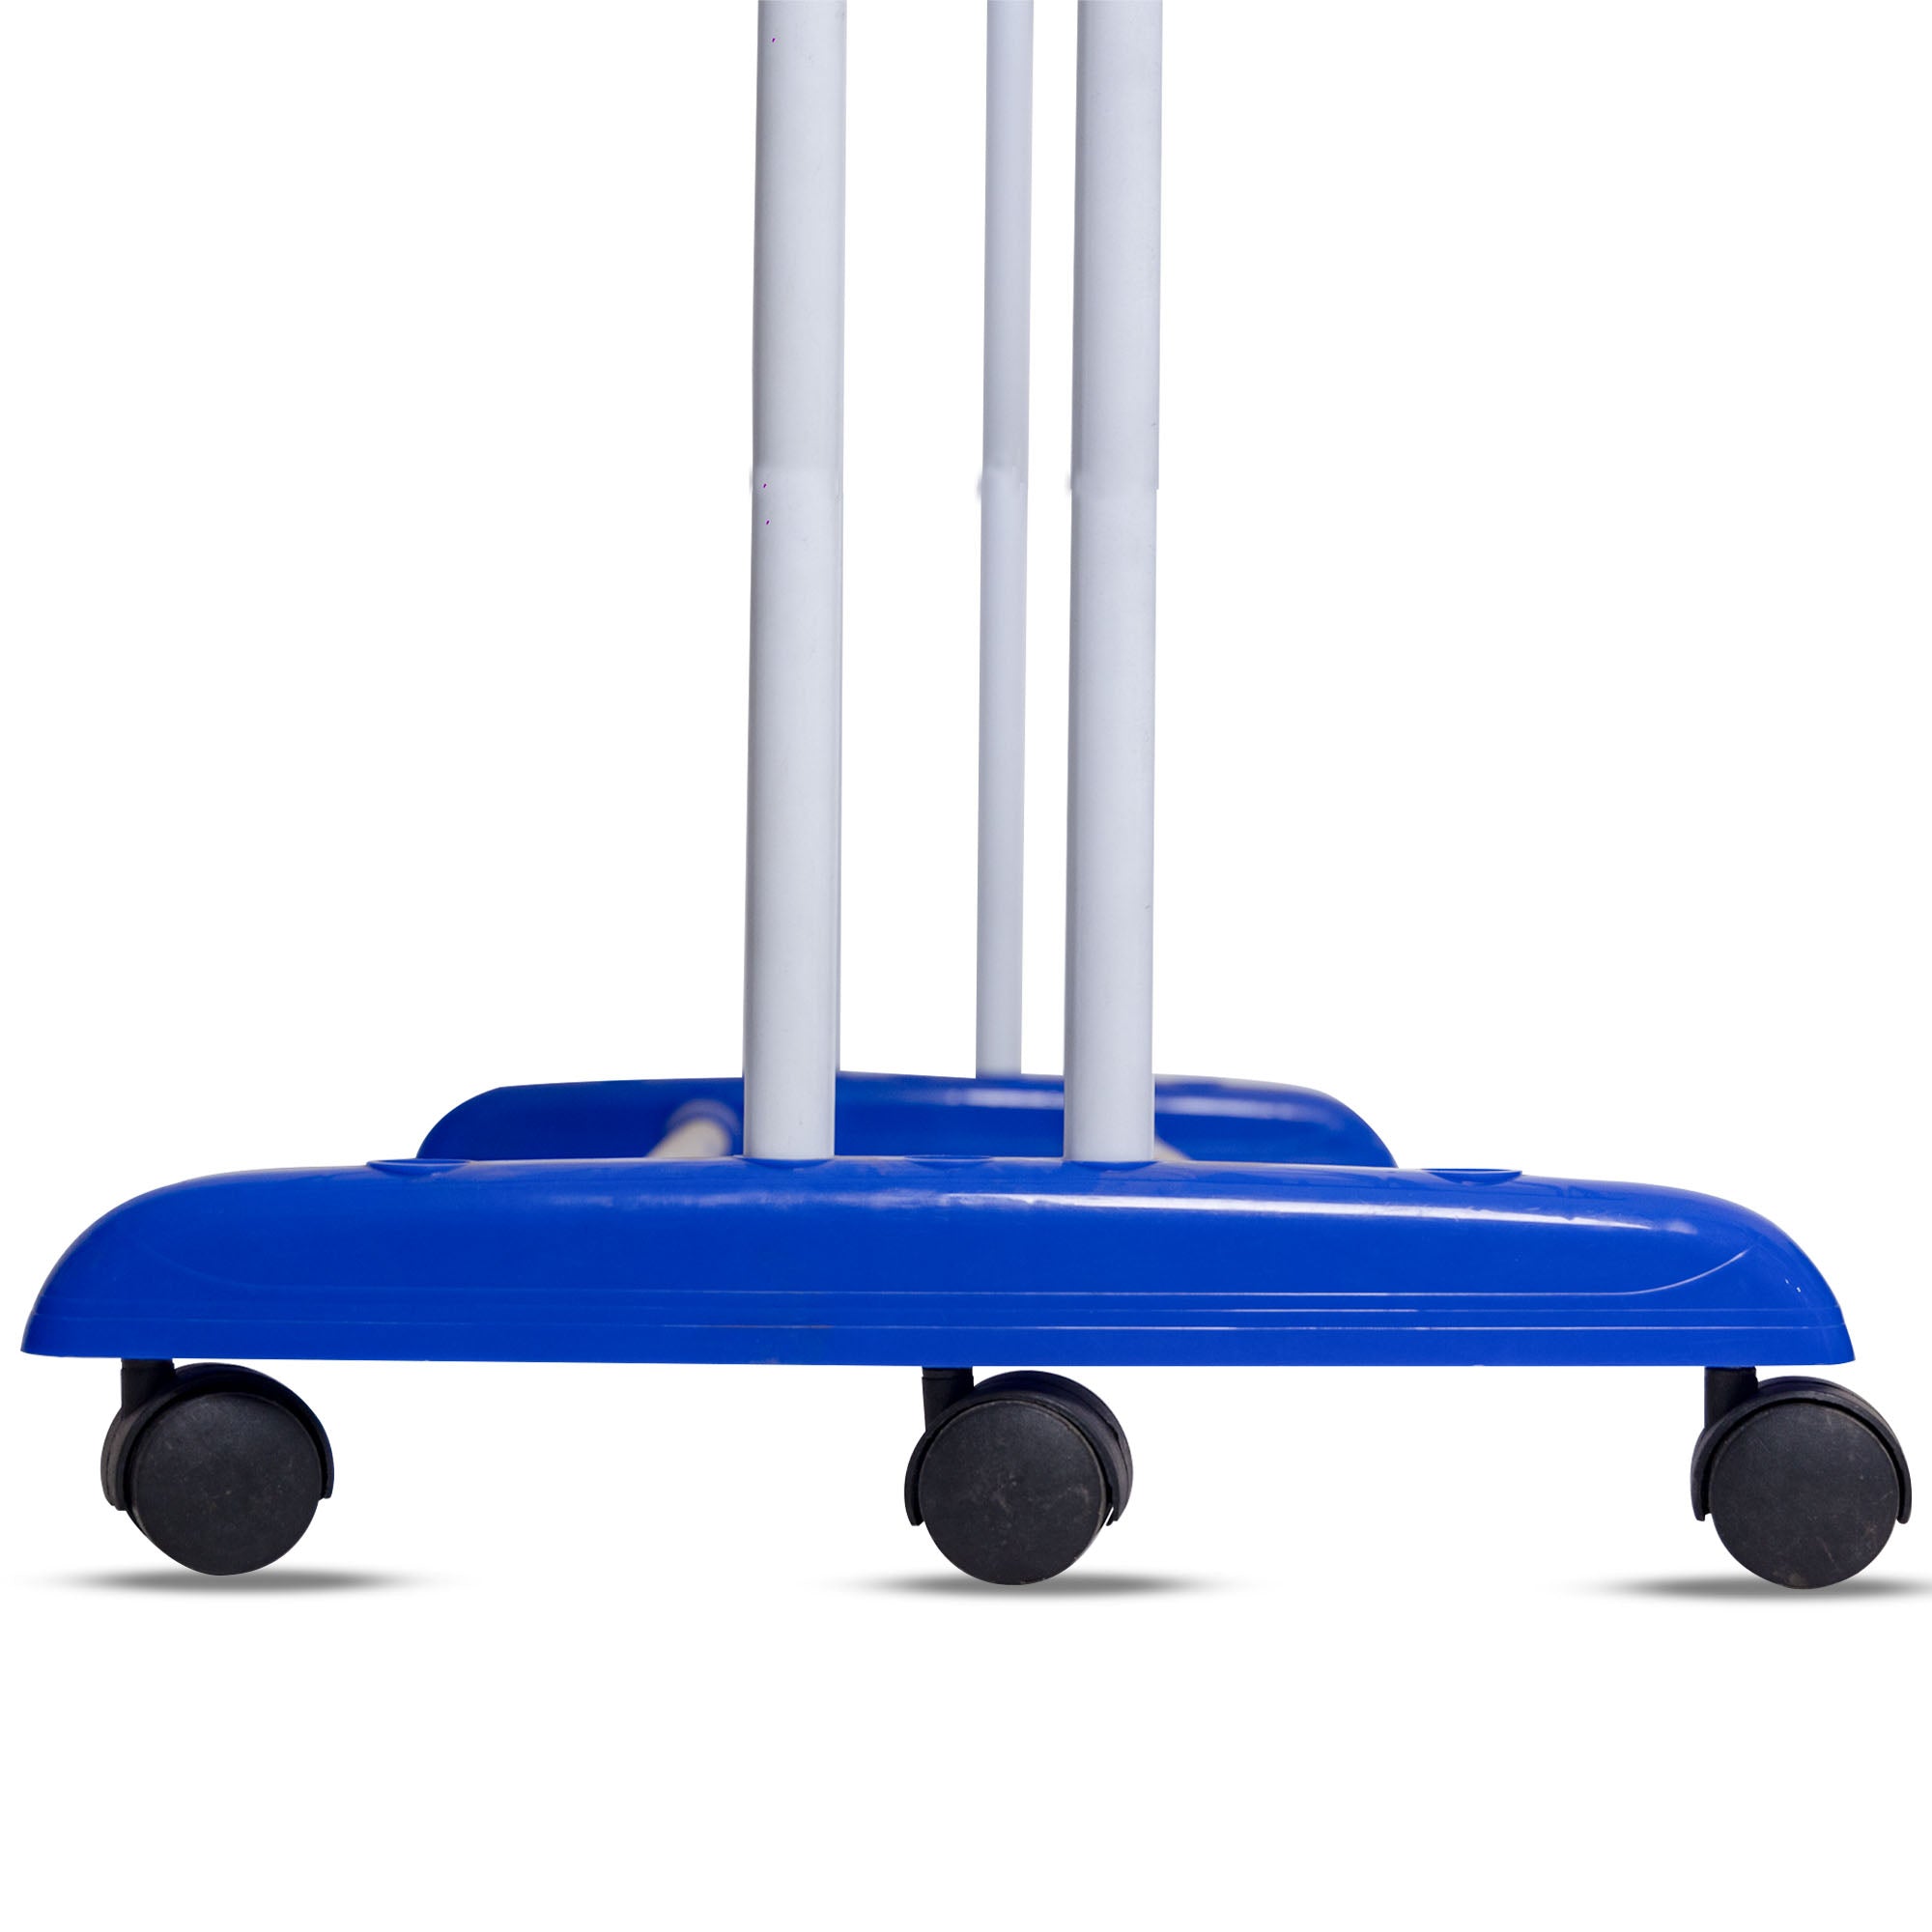 PoleMax Cloth Drying Stand | 3+1 Tier Big Foldable Powder Coated Mild Steel I Blue